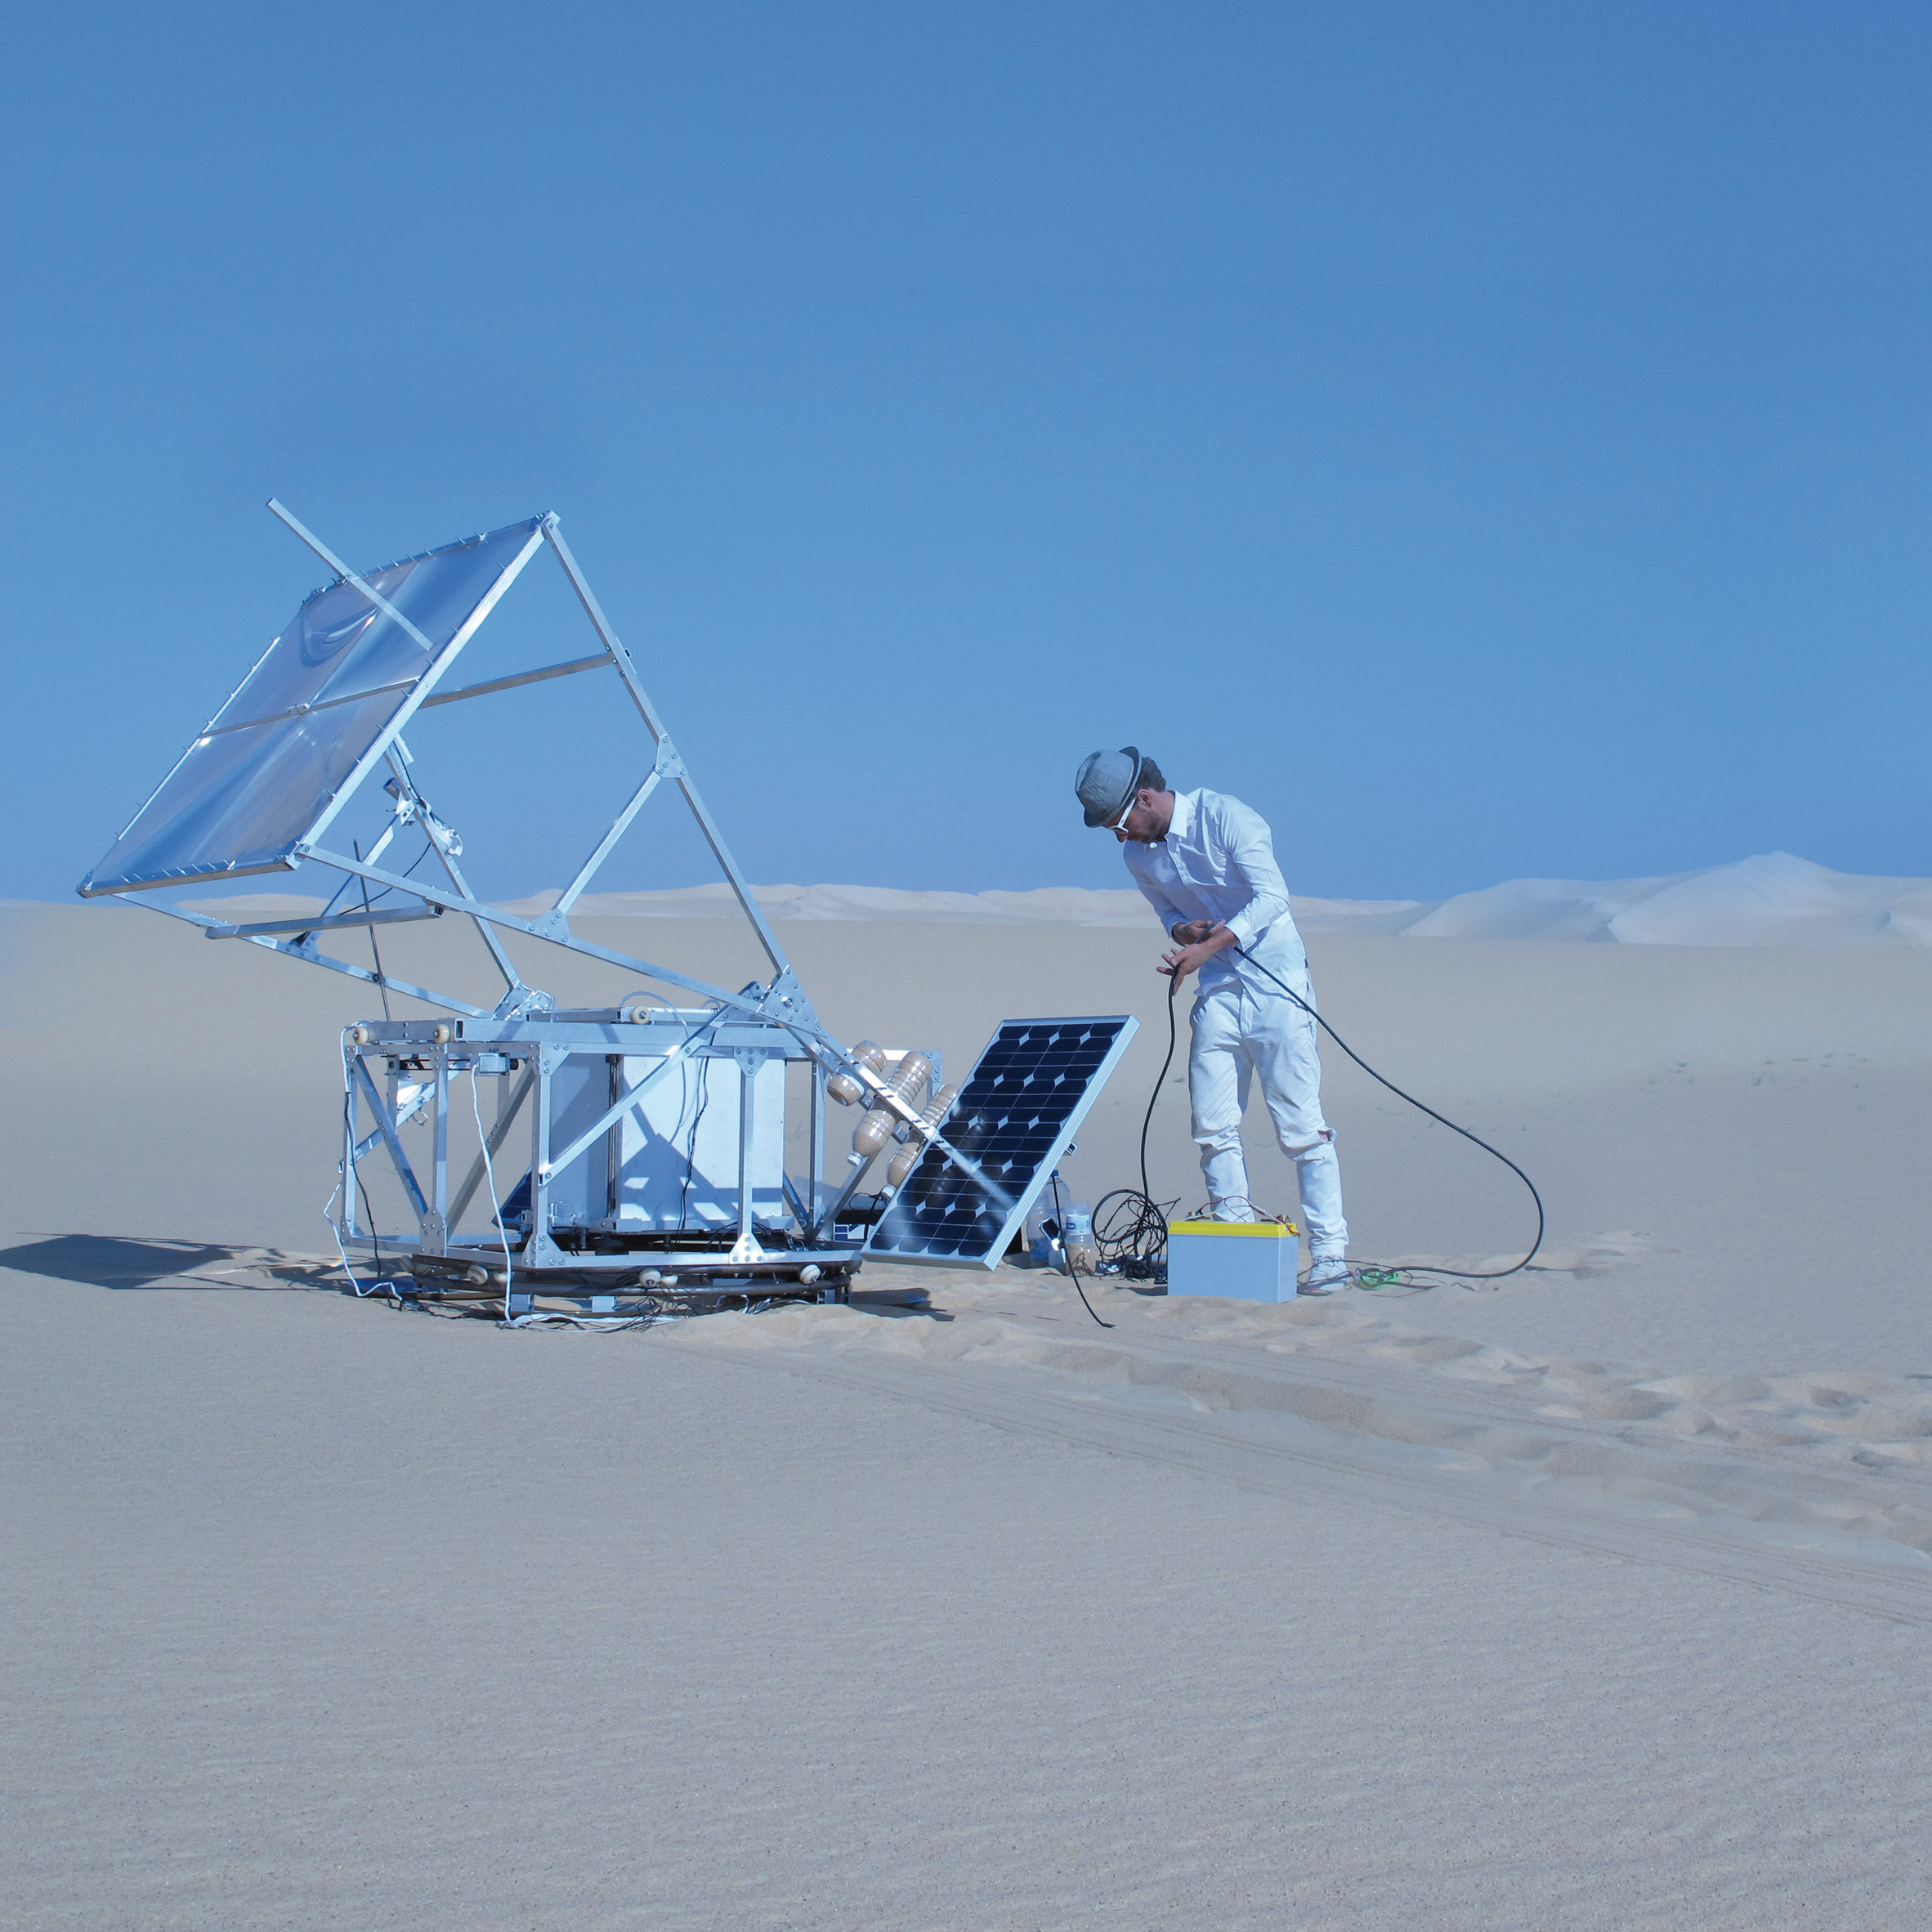 Markus Kayser will present his design and technology projects, which include The Solar Sinter